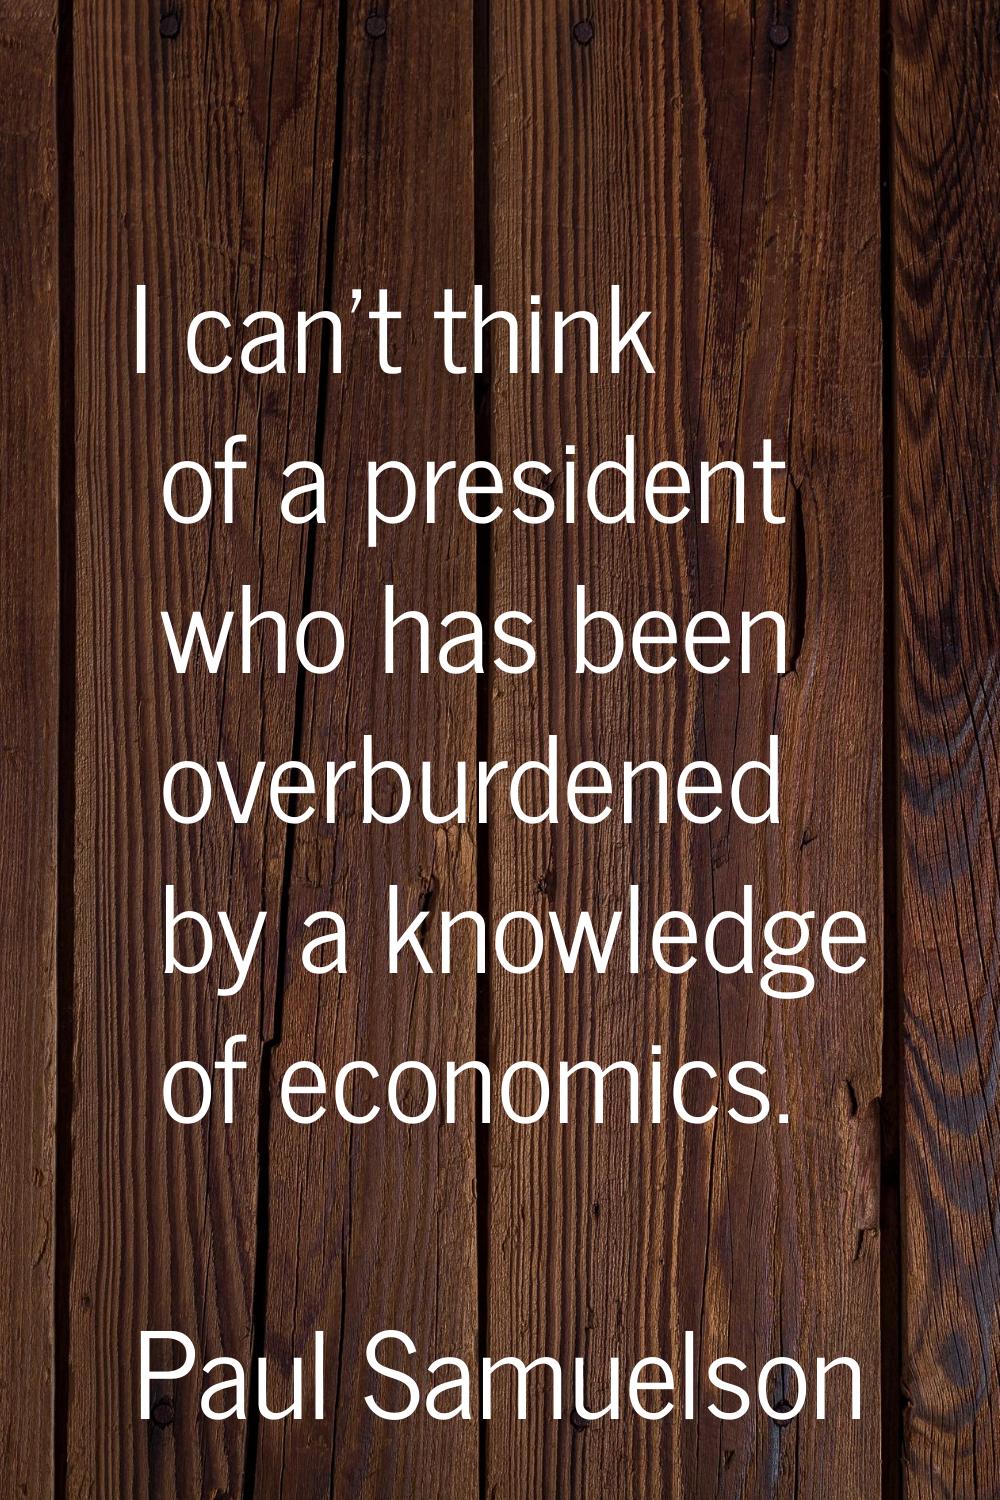 I can't think of a president who has been overburdened by a knowledge of economics.